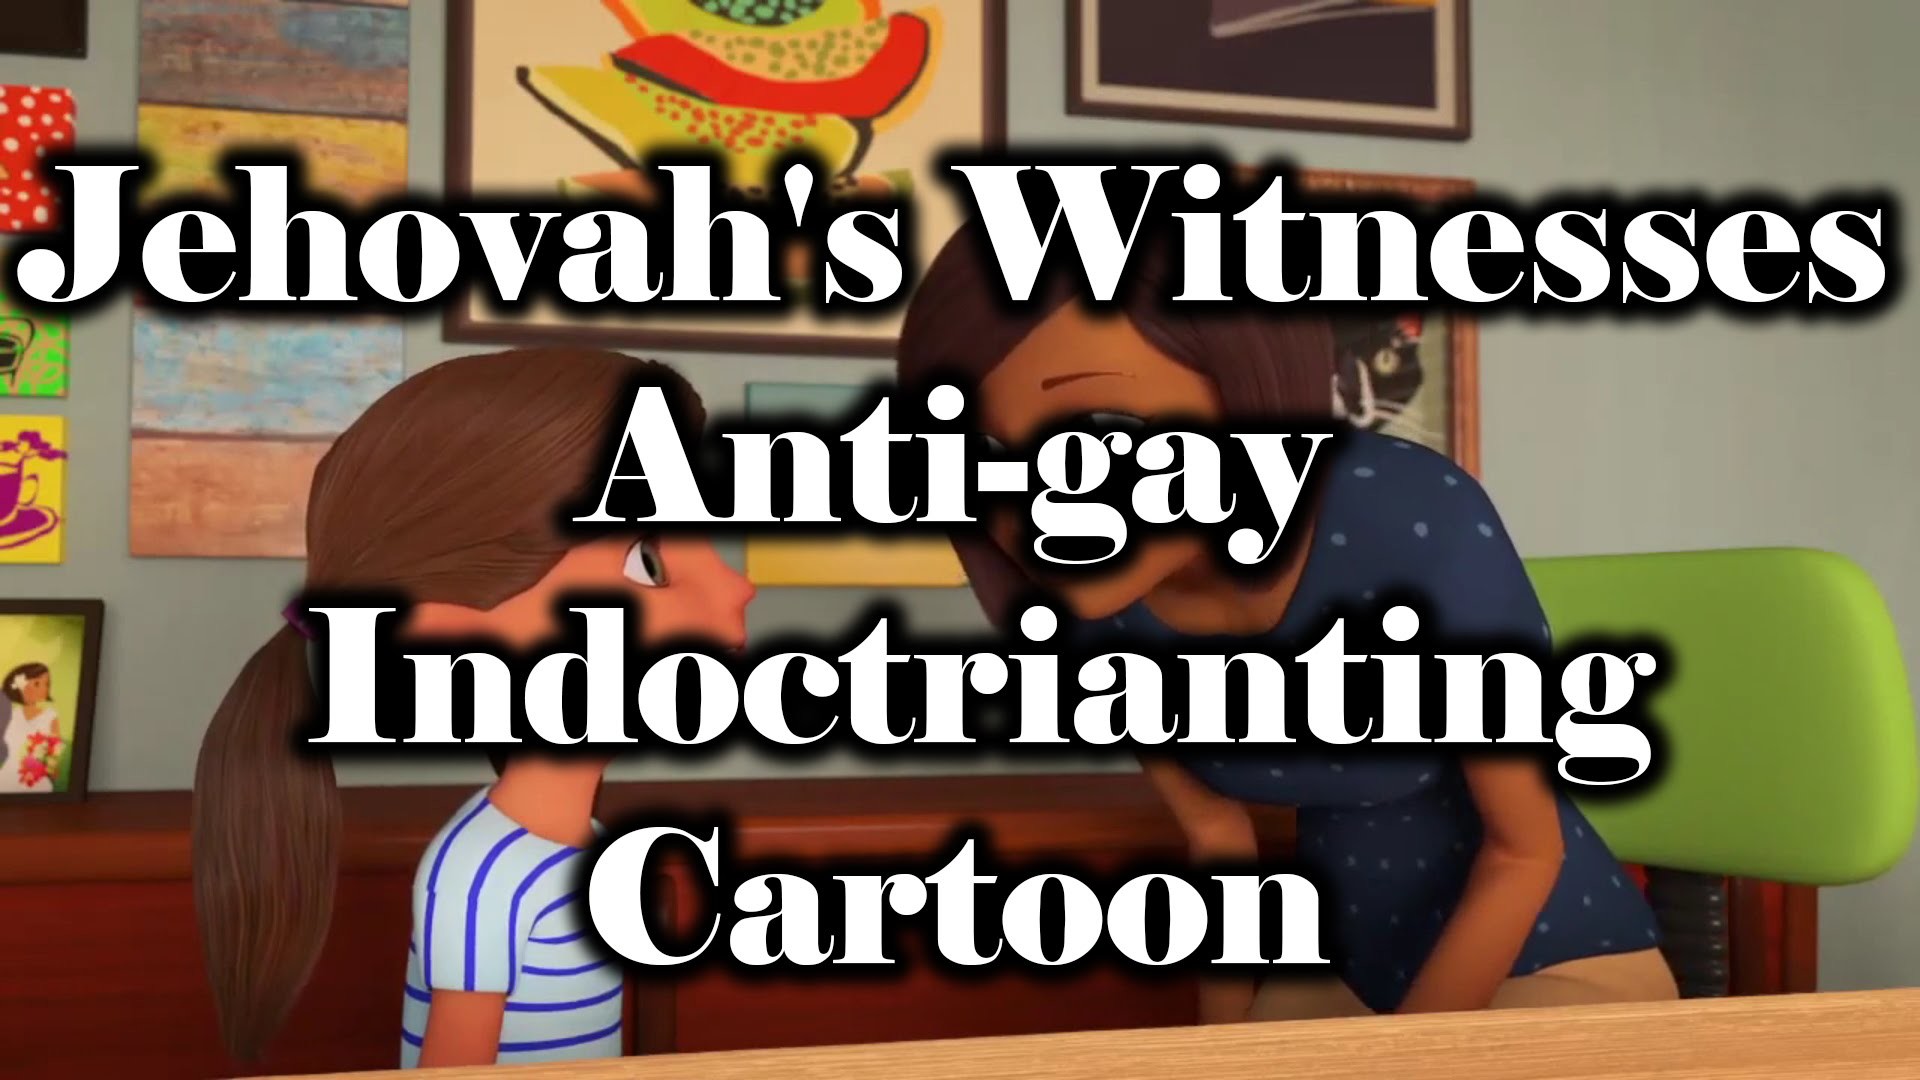 1920x1080 Jehovah's Witnesses bizarre and disturbing video teaching kids to be  homophobic!